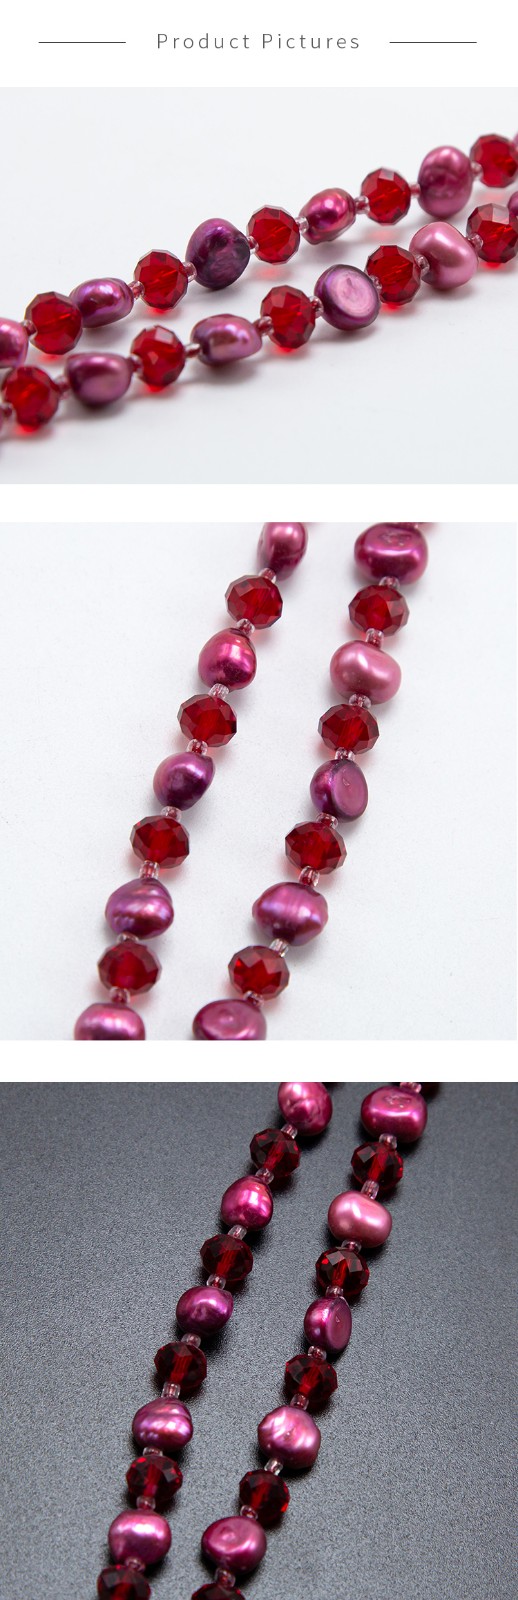 Red Faceted Rondelle Glass Beads and Dyed Pearl Beads